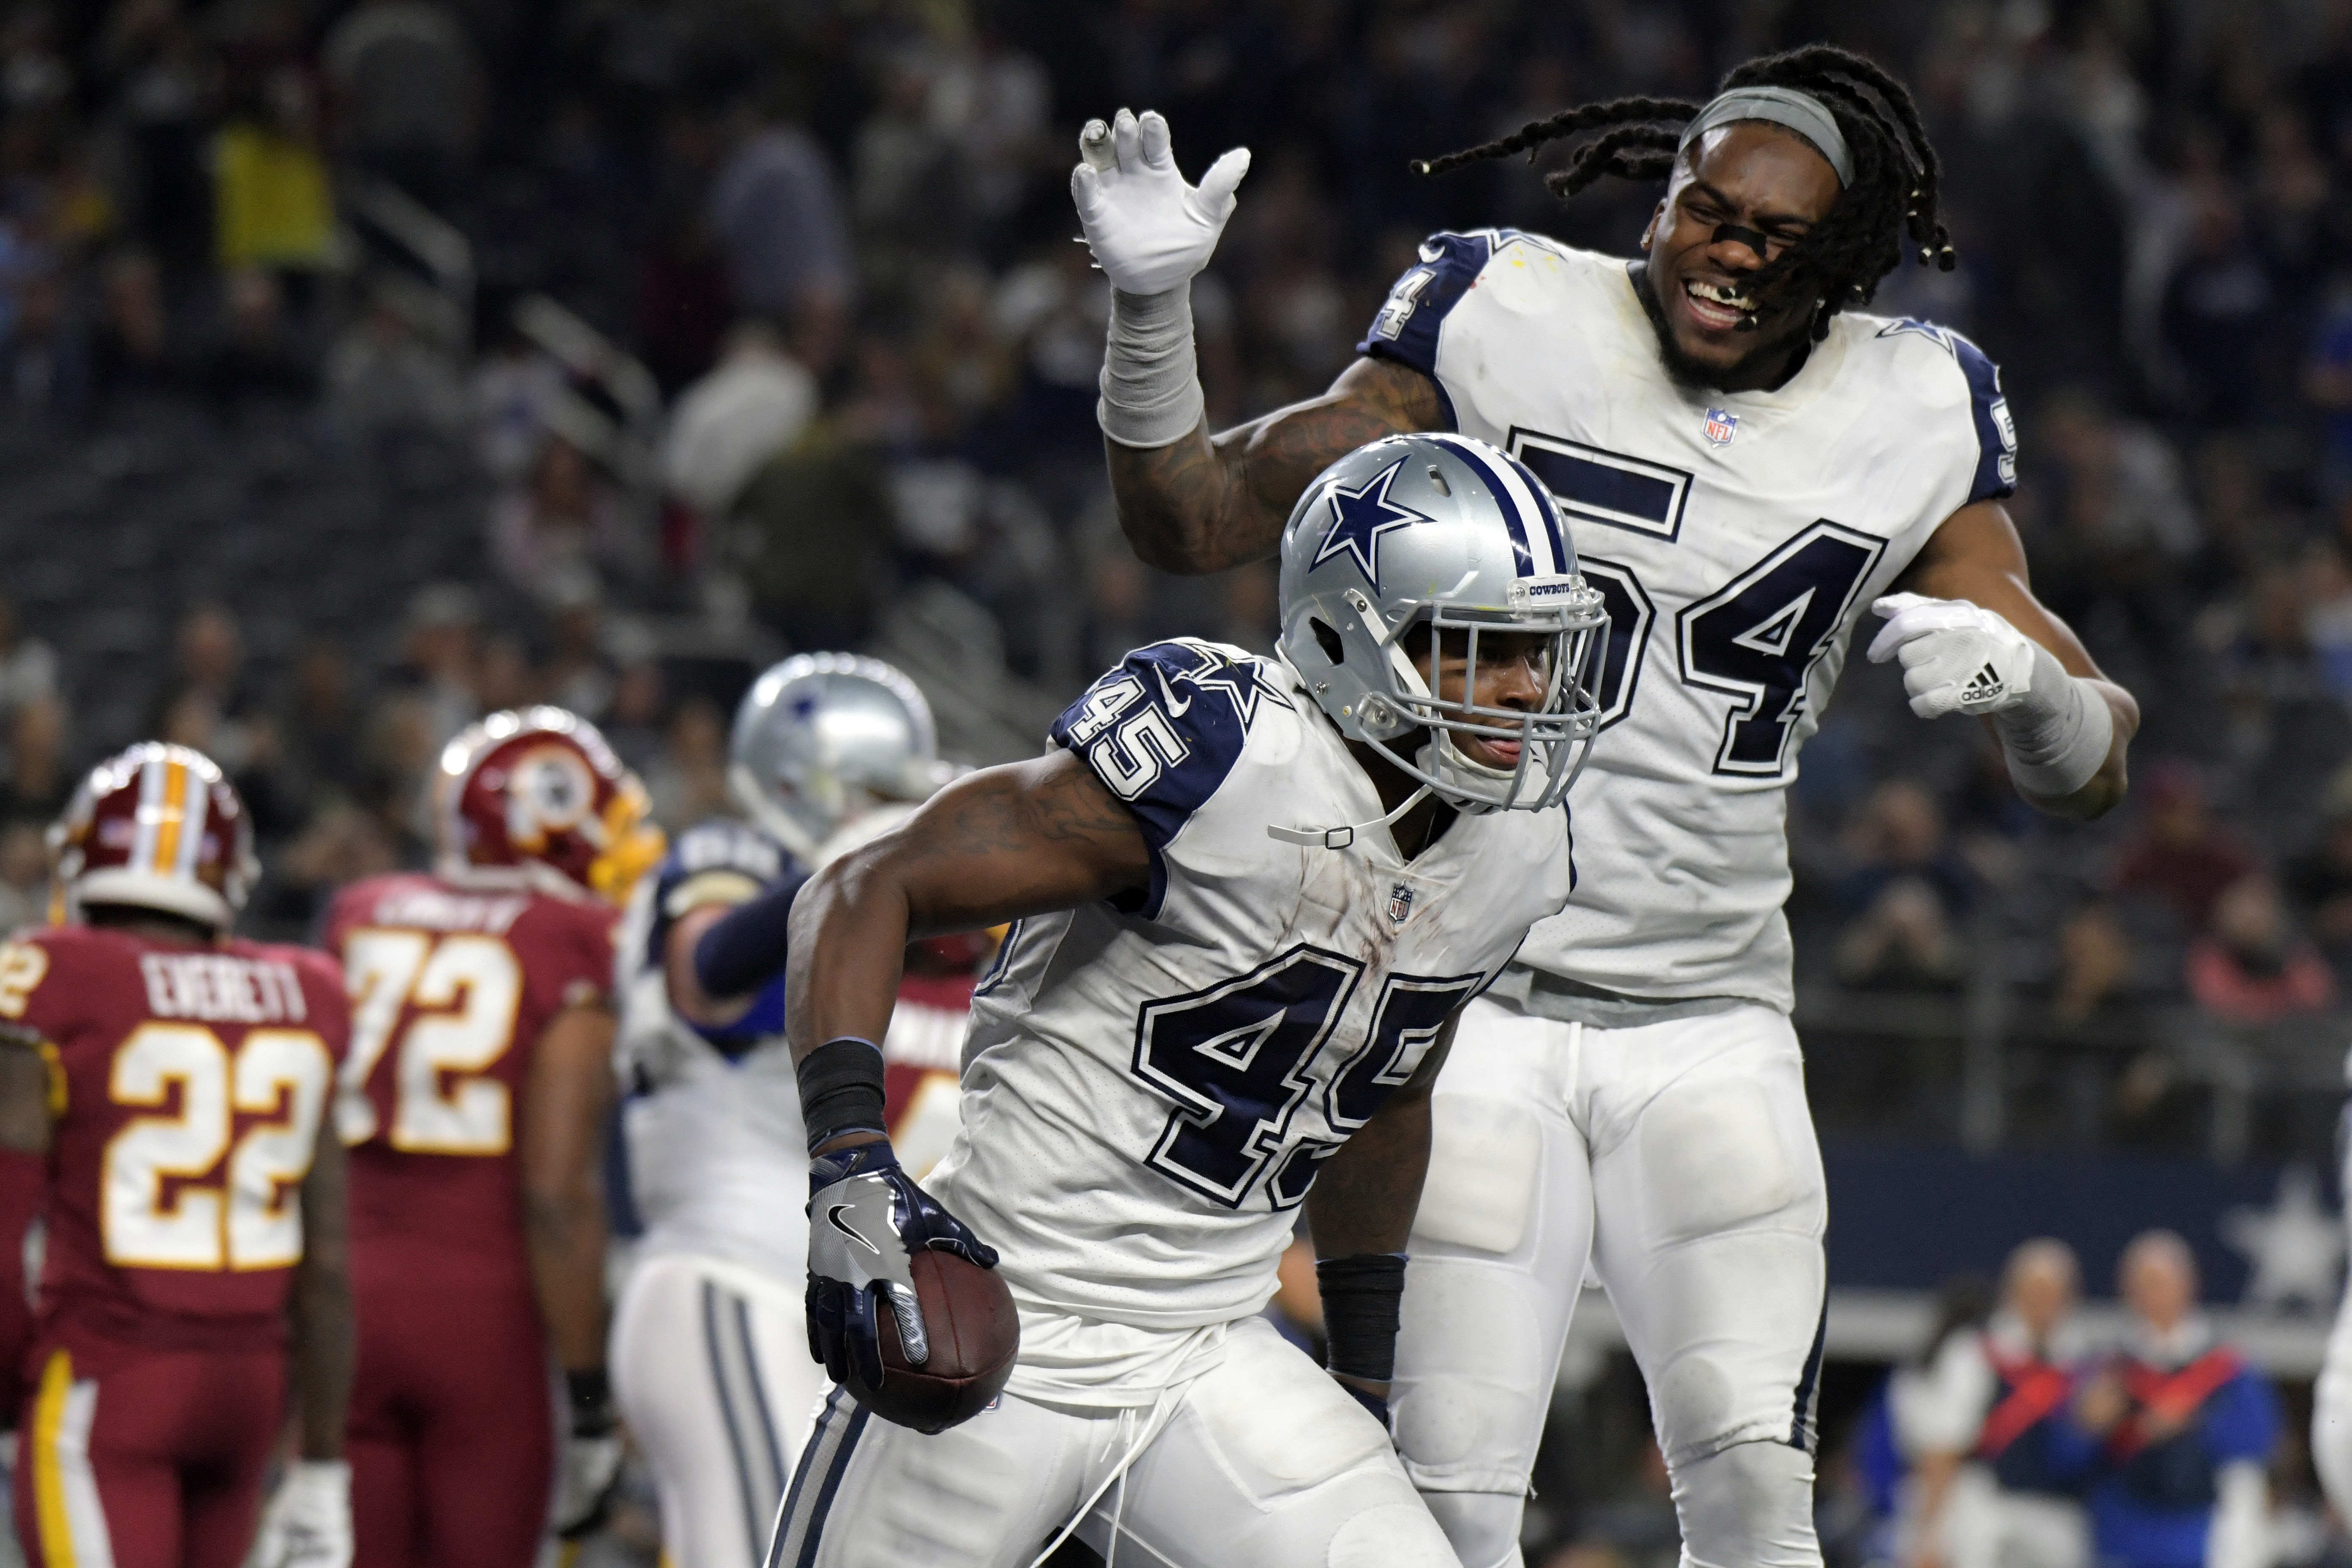 Jaylon Smith will feel the pressure in Cowboys’ opening game